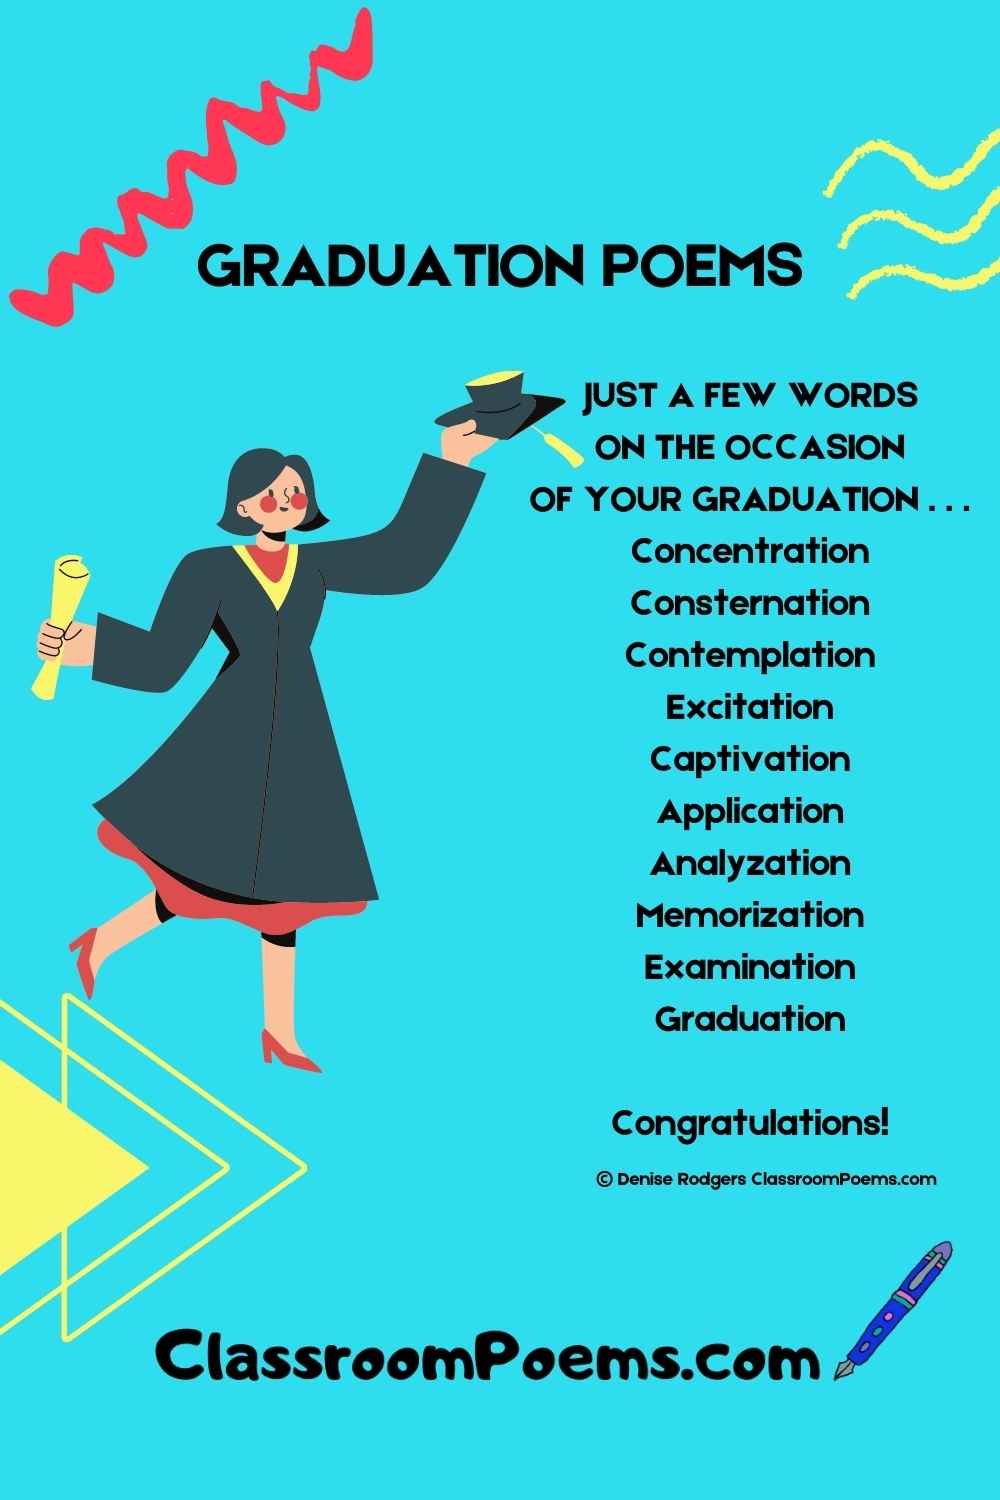 Funny Graduation Poems by Denise Rodgers on ClassroomPoems.com.